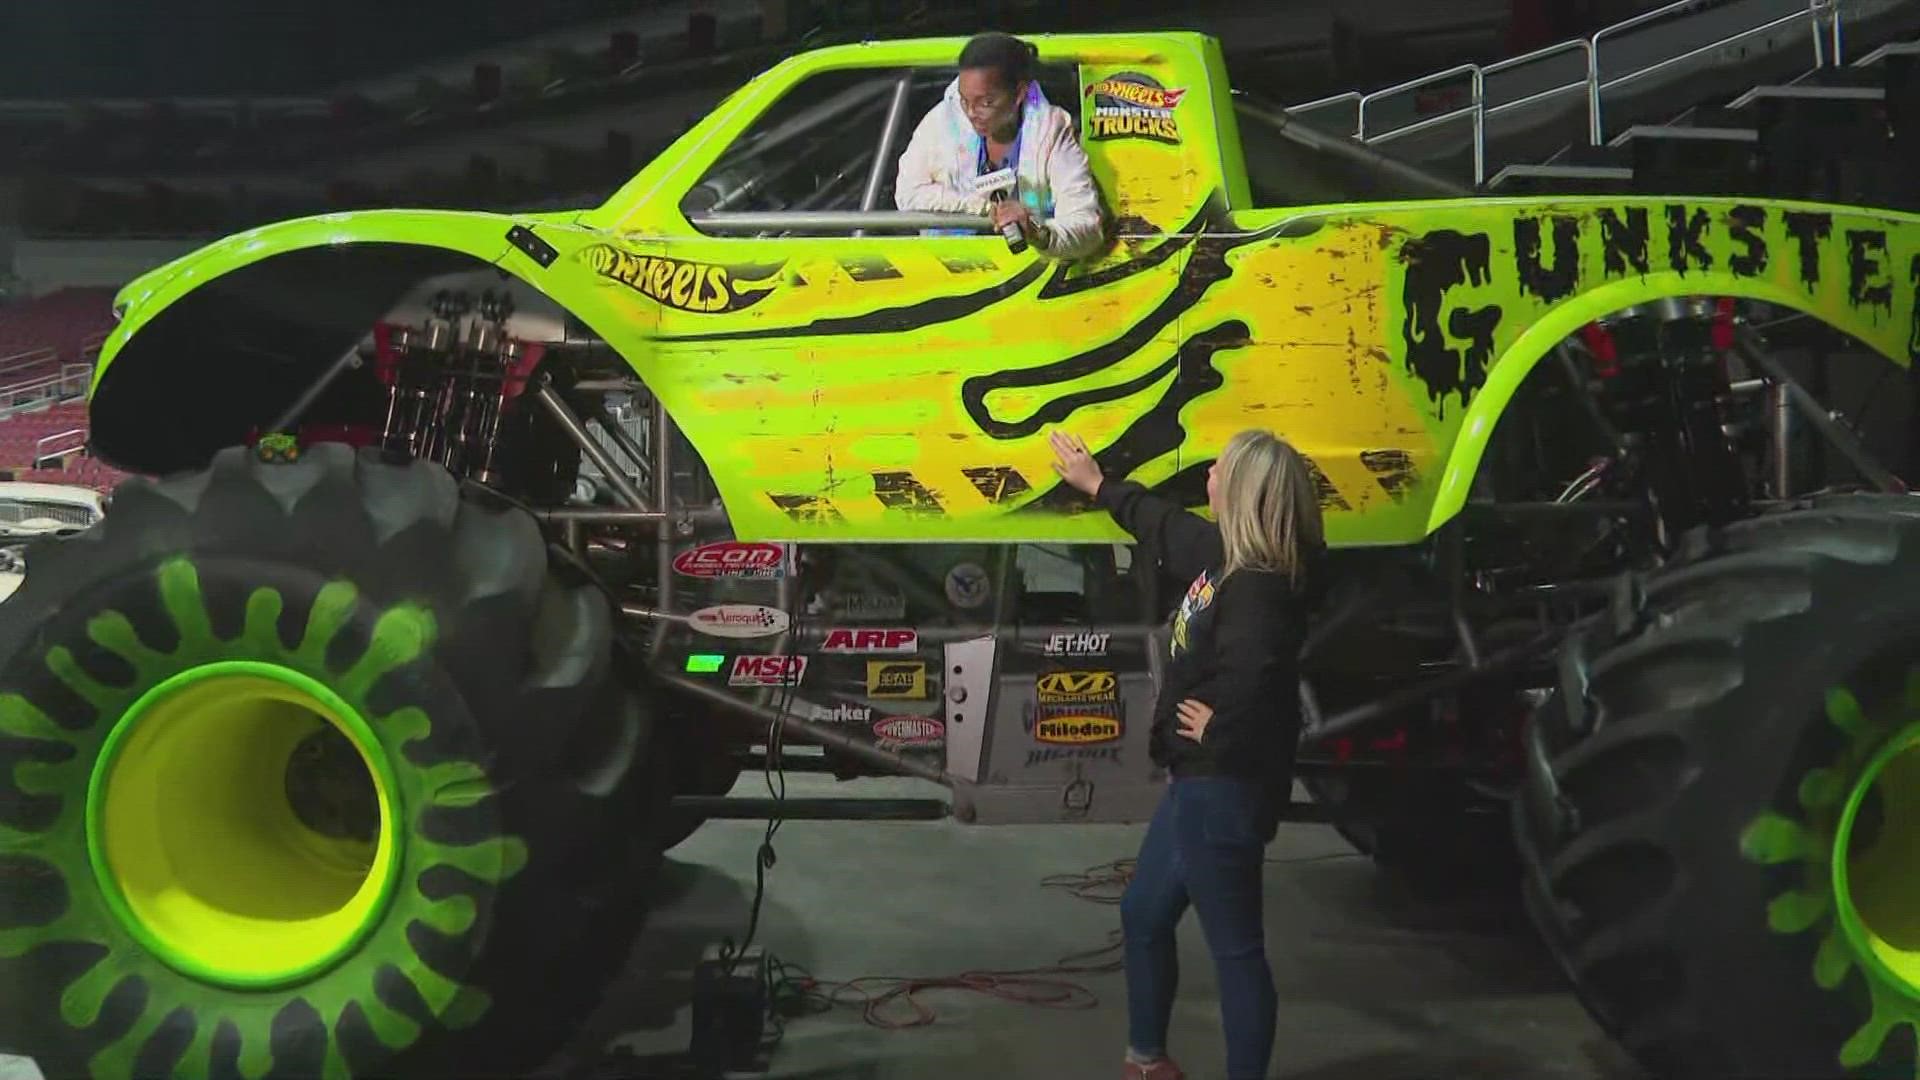 WHAS11's Gabriel Harmon got up close and personal in Hot Wheels Monster Trucks Live's newest truck: Gunkster.